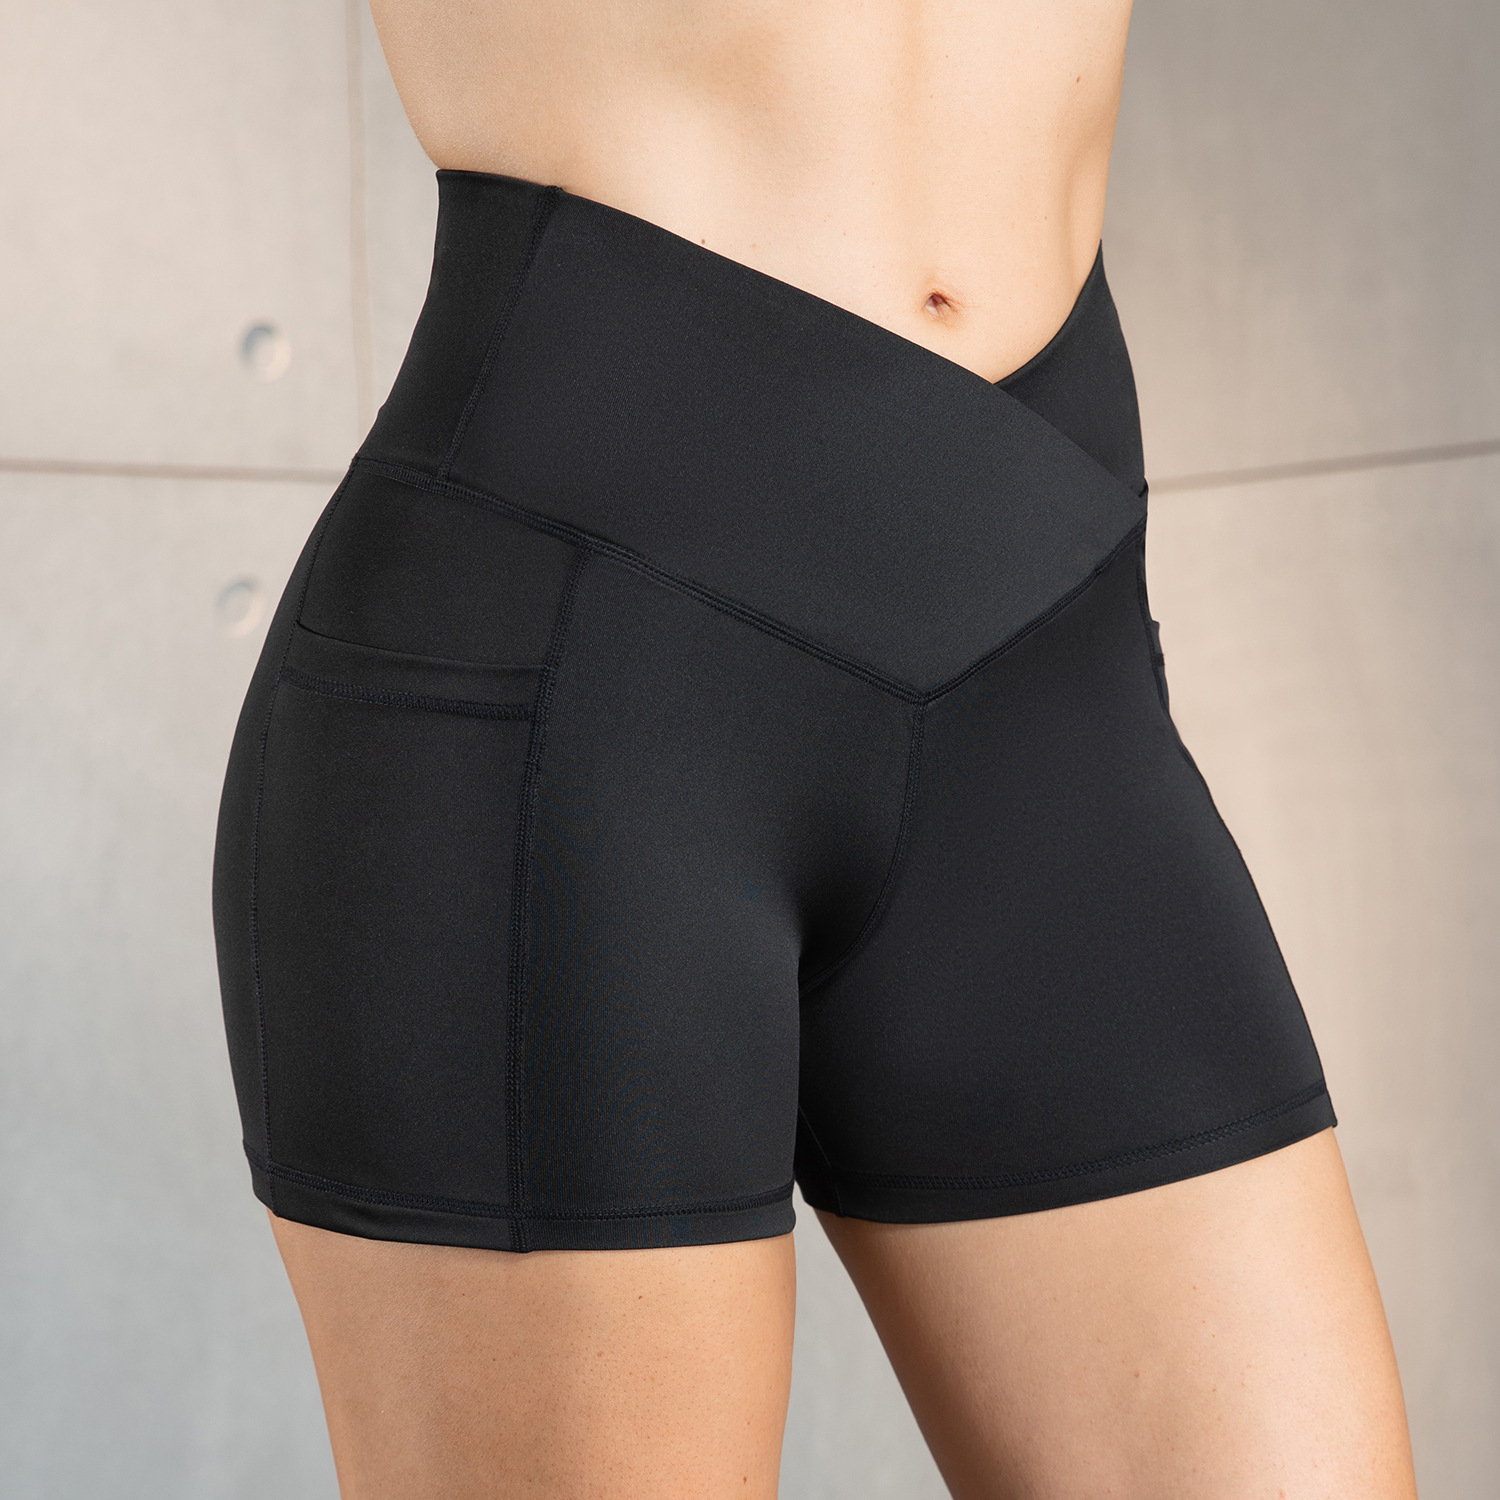 High elastic cross waisted shorts for women, abdominal tightening and hip lifting exercise, fitness yoga pants, tight and nude three piece pants